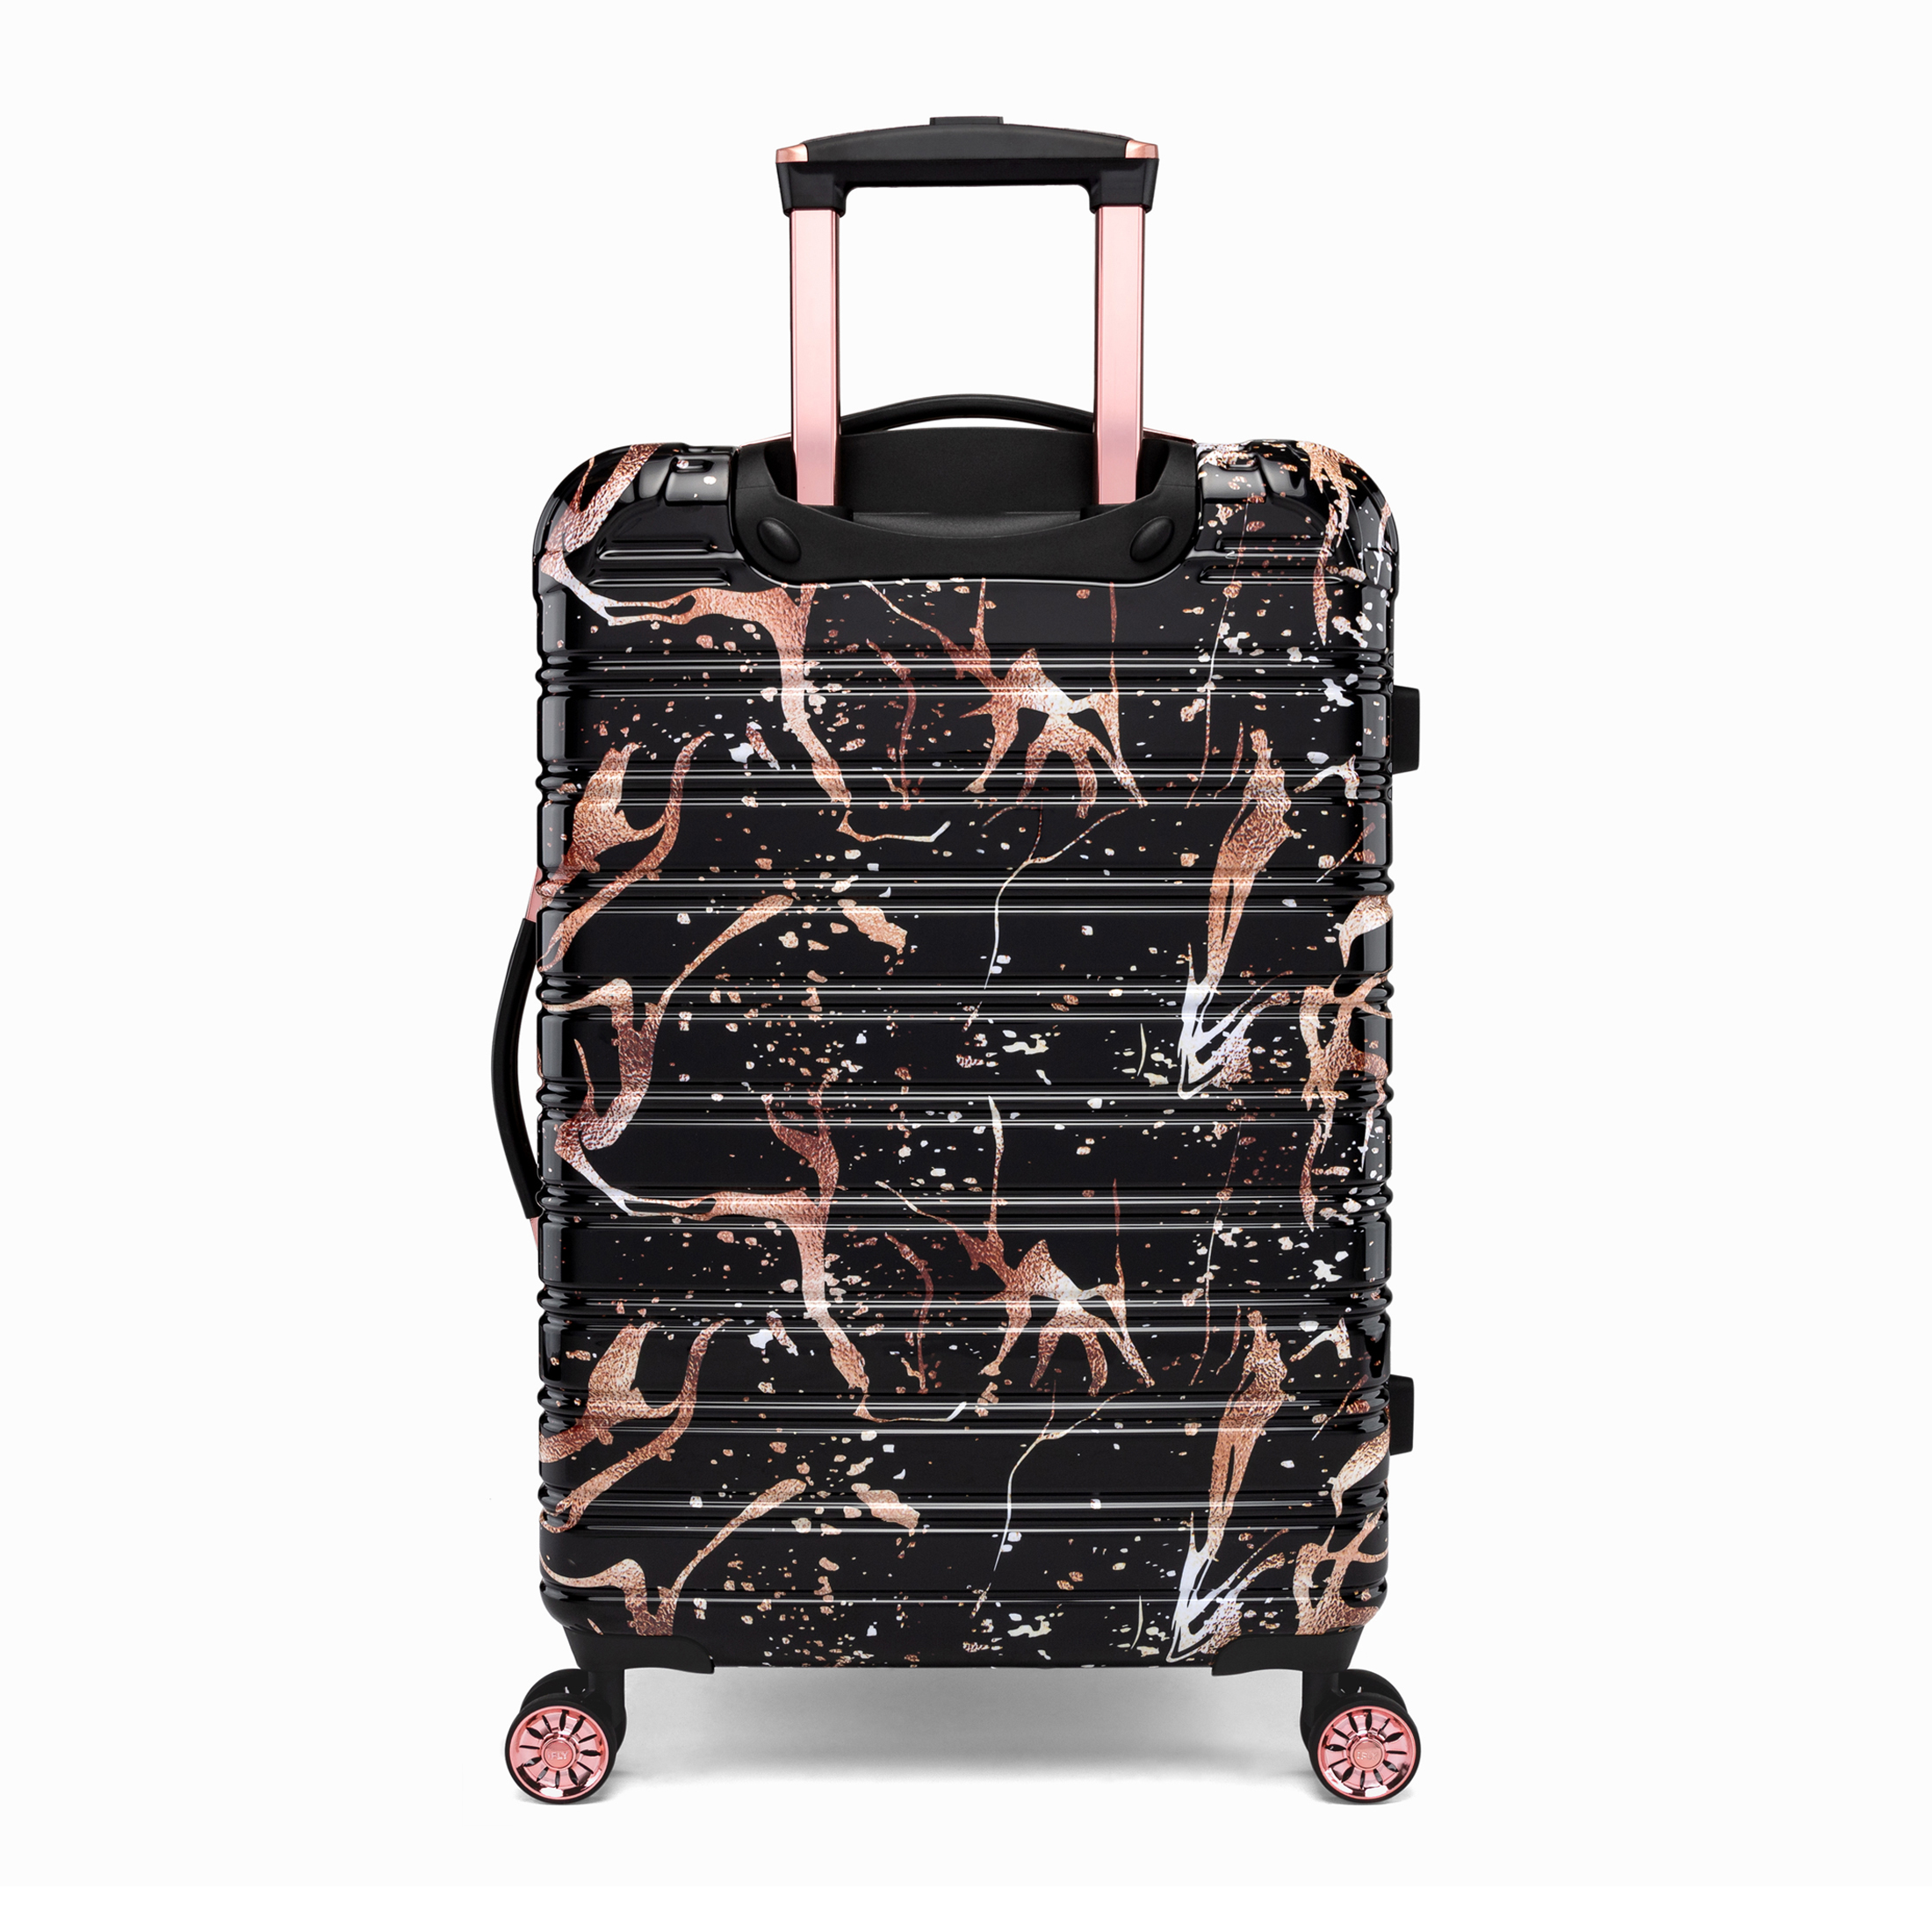 IFLY - Fibertech Marble Hardside Luggage 20 Inch Carry-on,  Black/Rose Gold - image 4 of 7